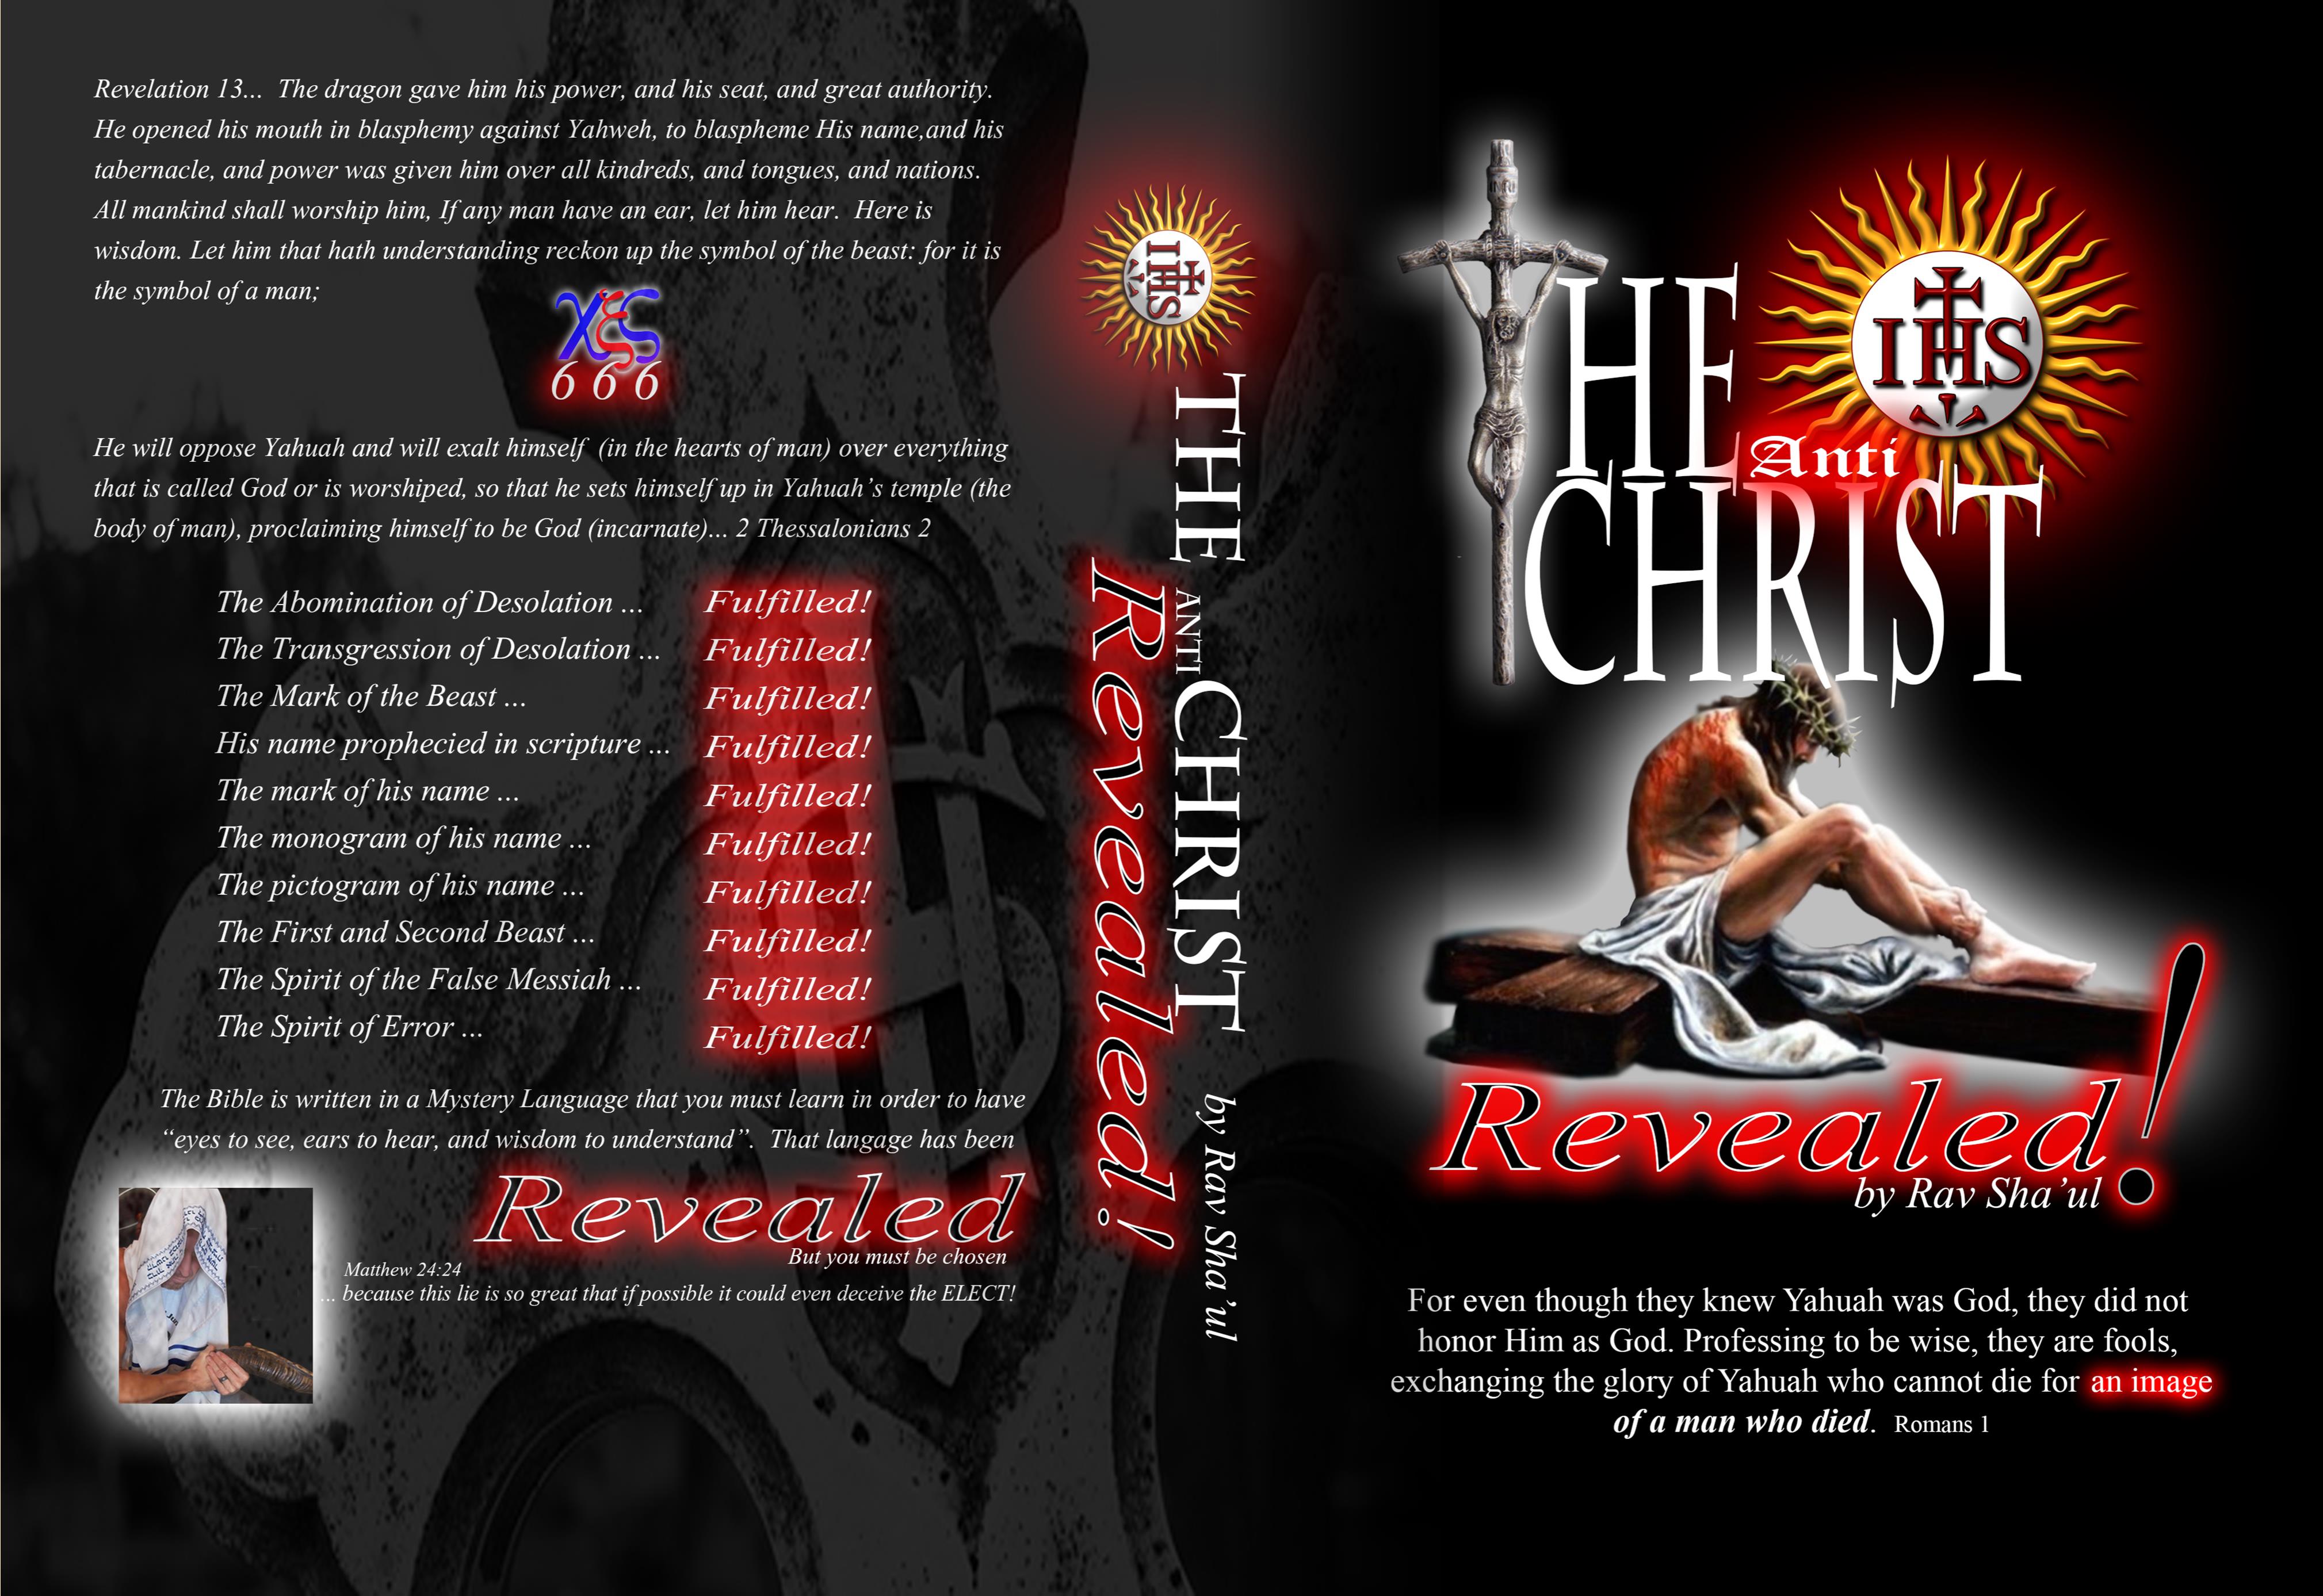 The Antichrist Revealed! cover image